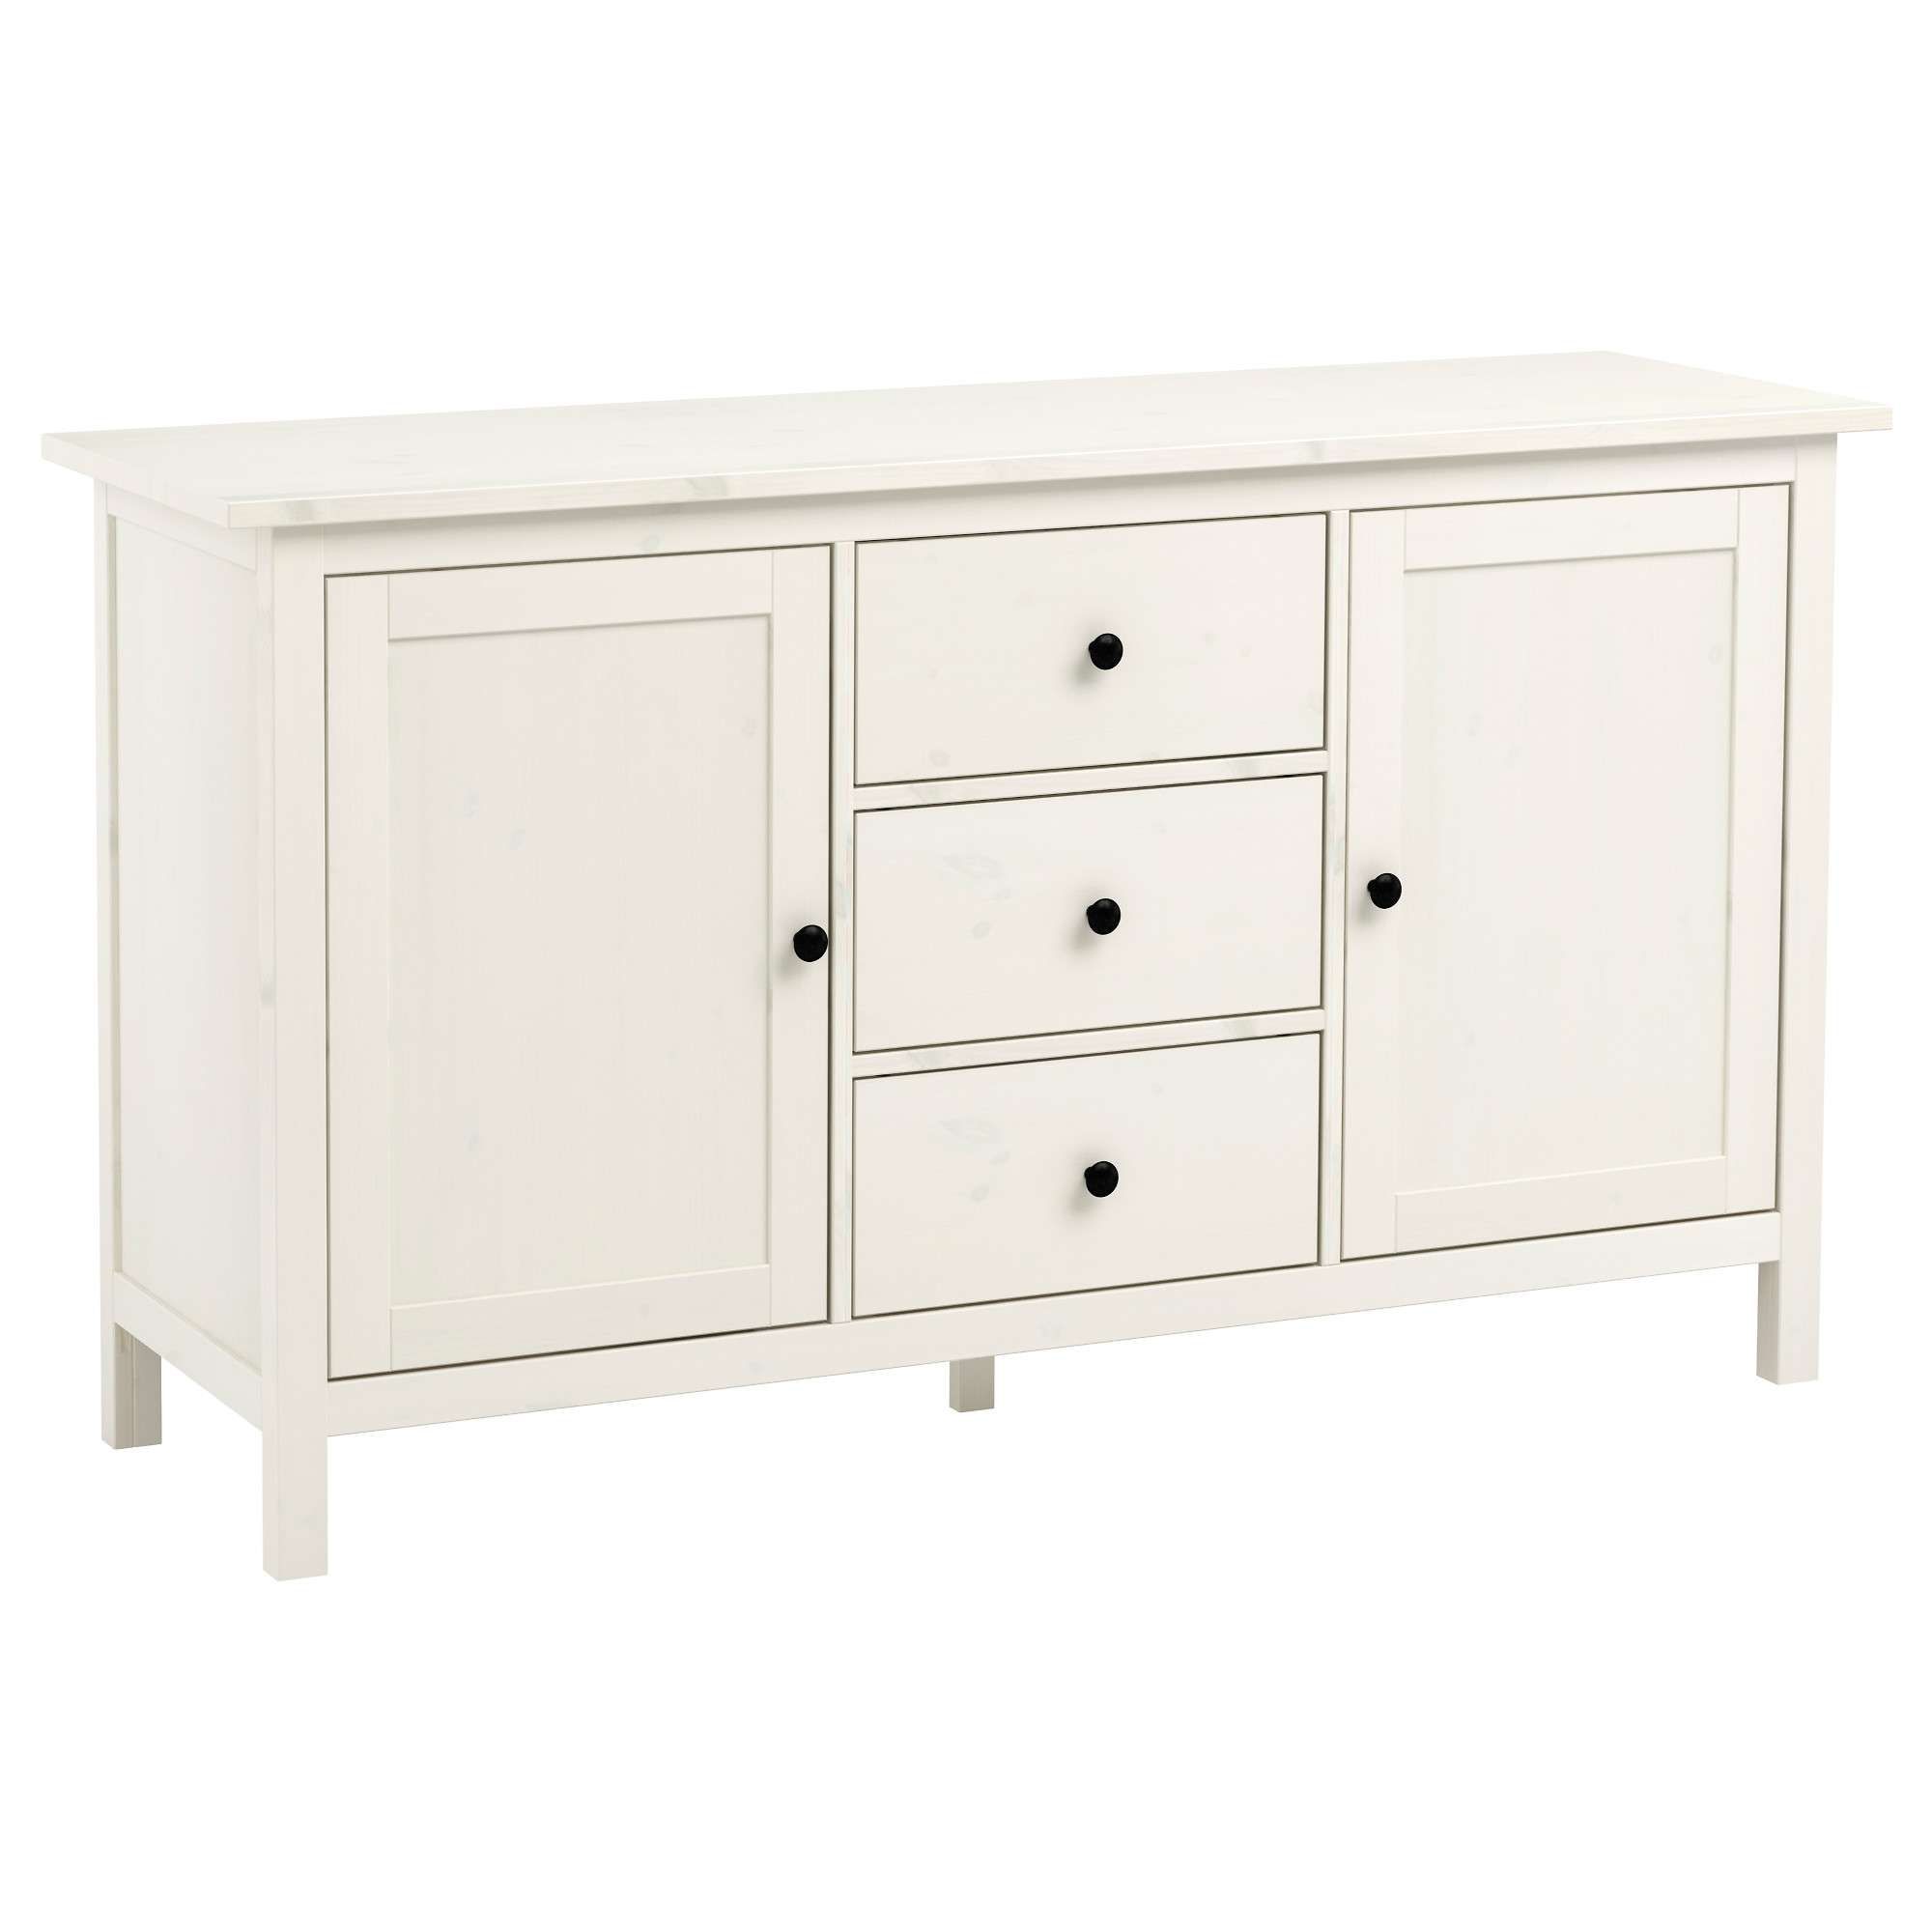 Hemnes Sideboard – White Stain – Ikea For Sideboards Decors (View 16 of 20)